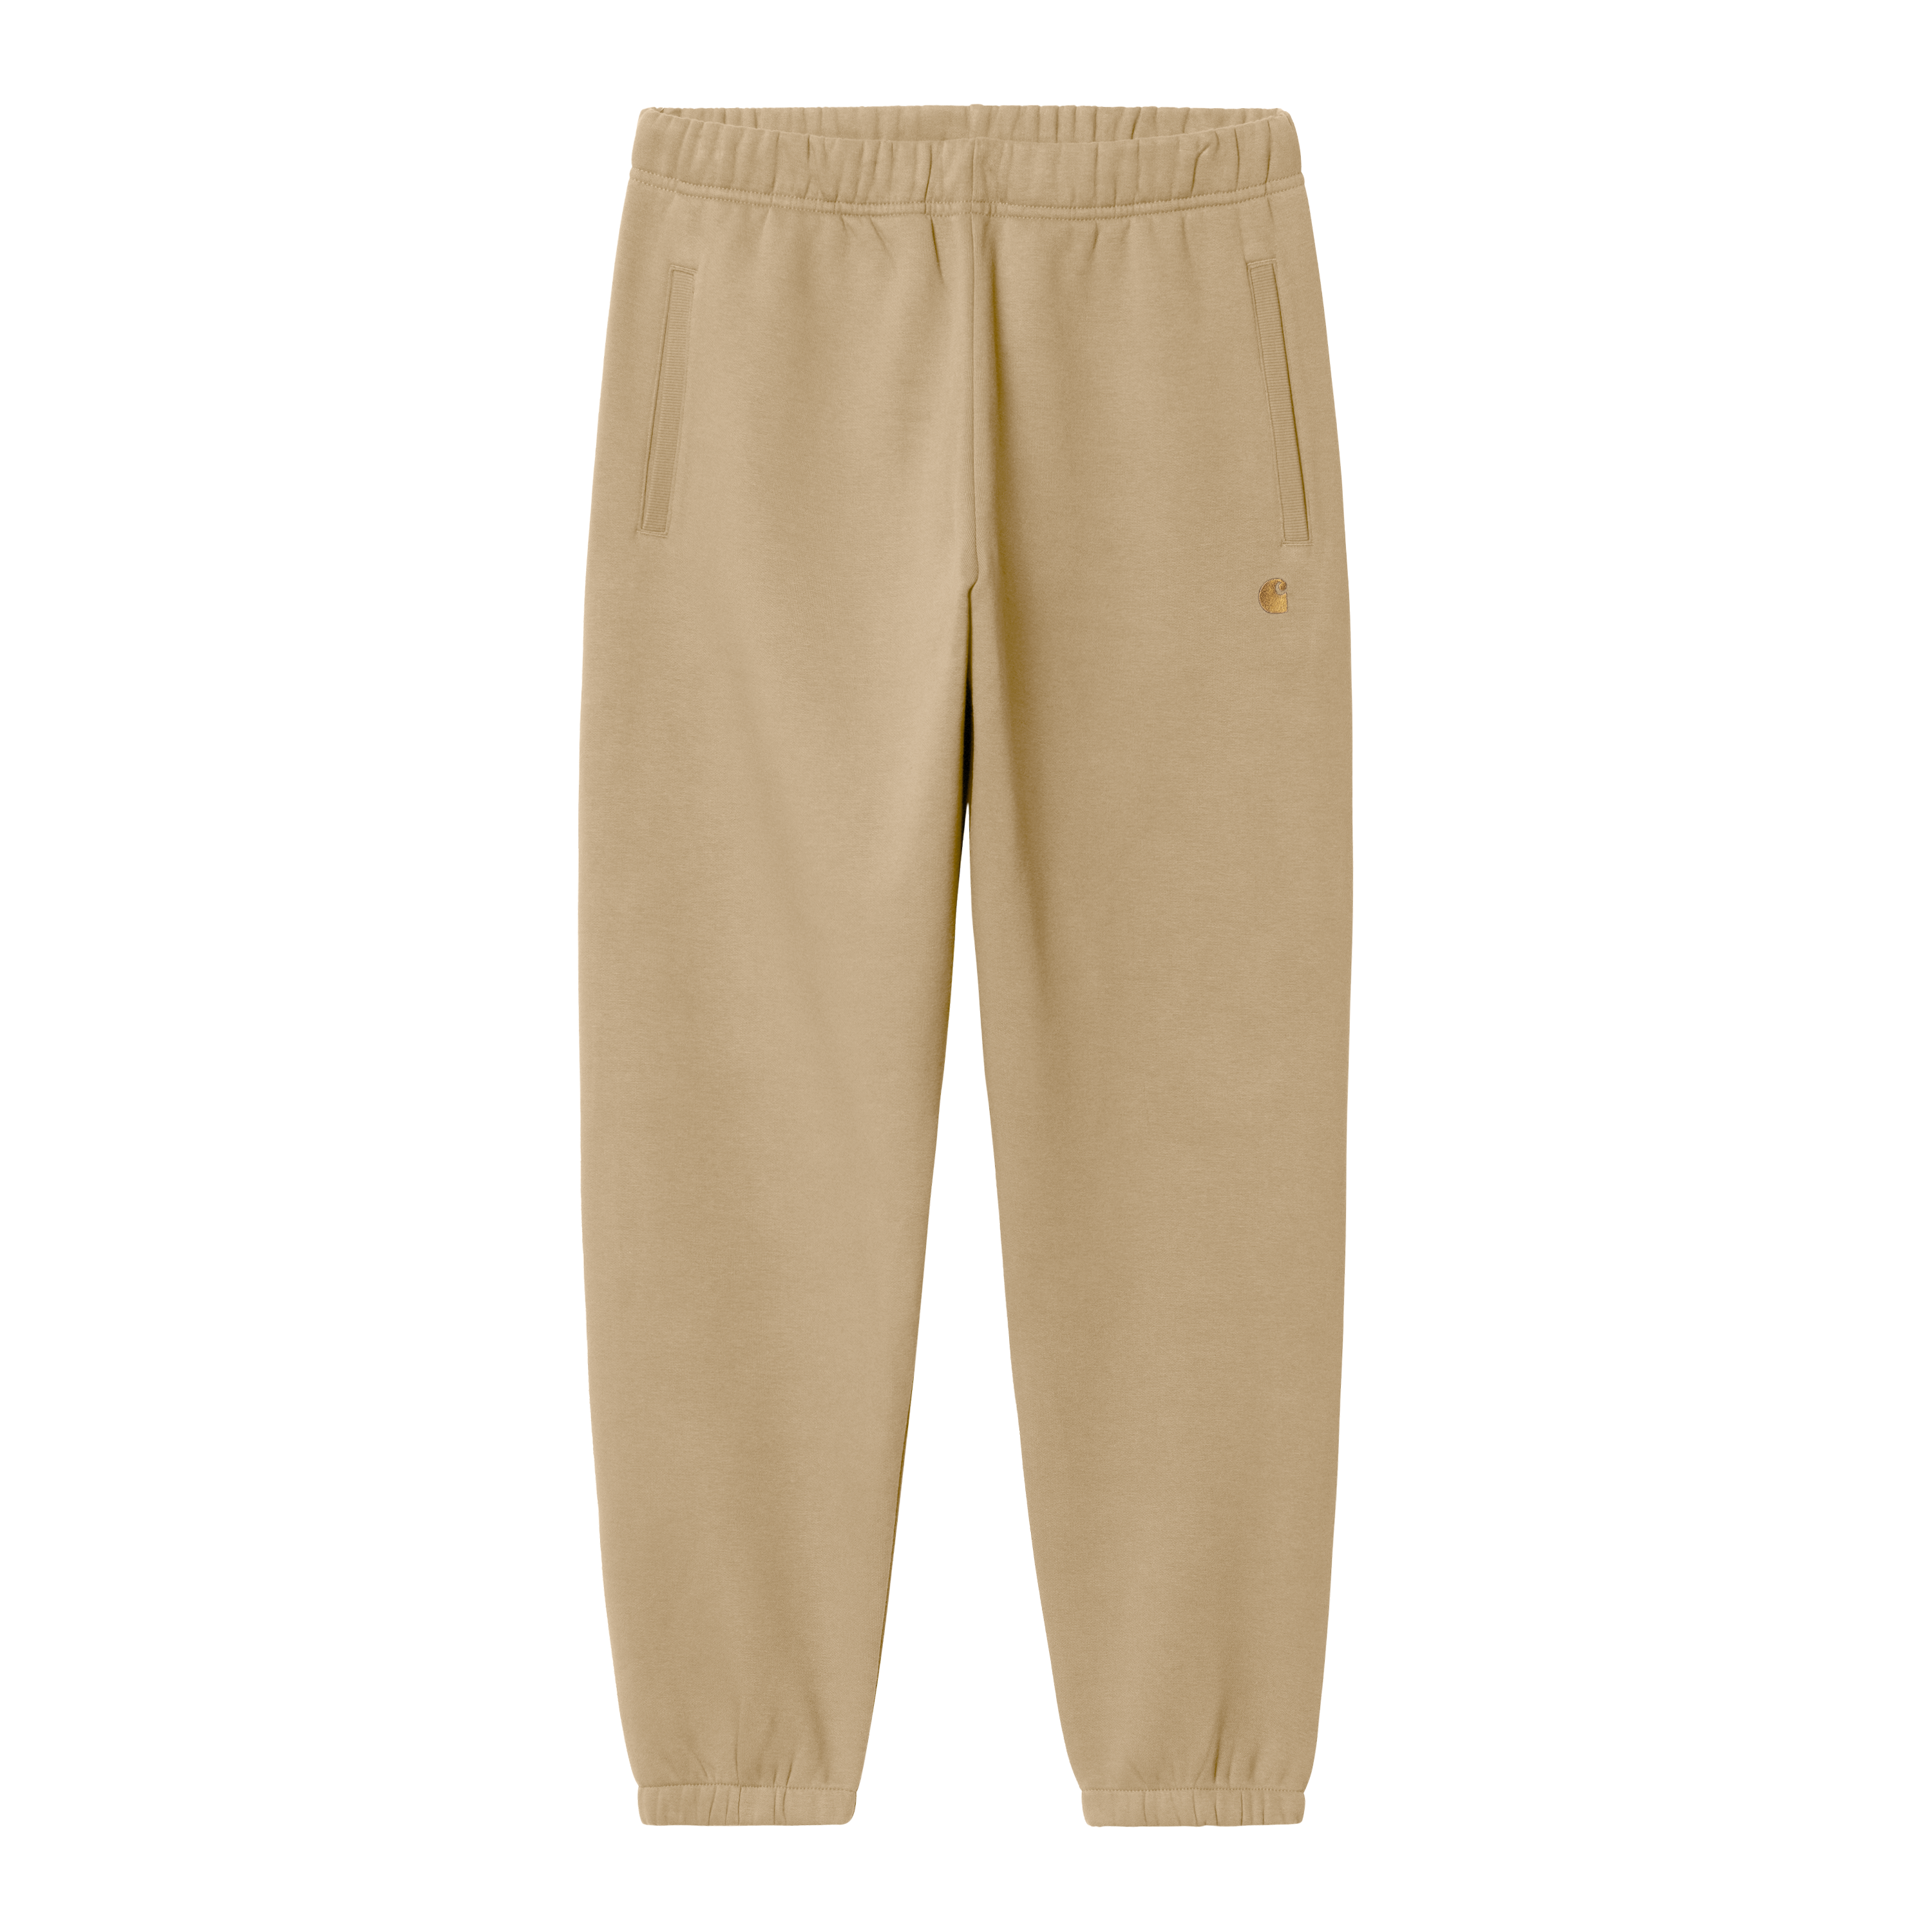 Carhartt WIP Chase Sweat Pant in Beige